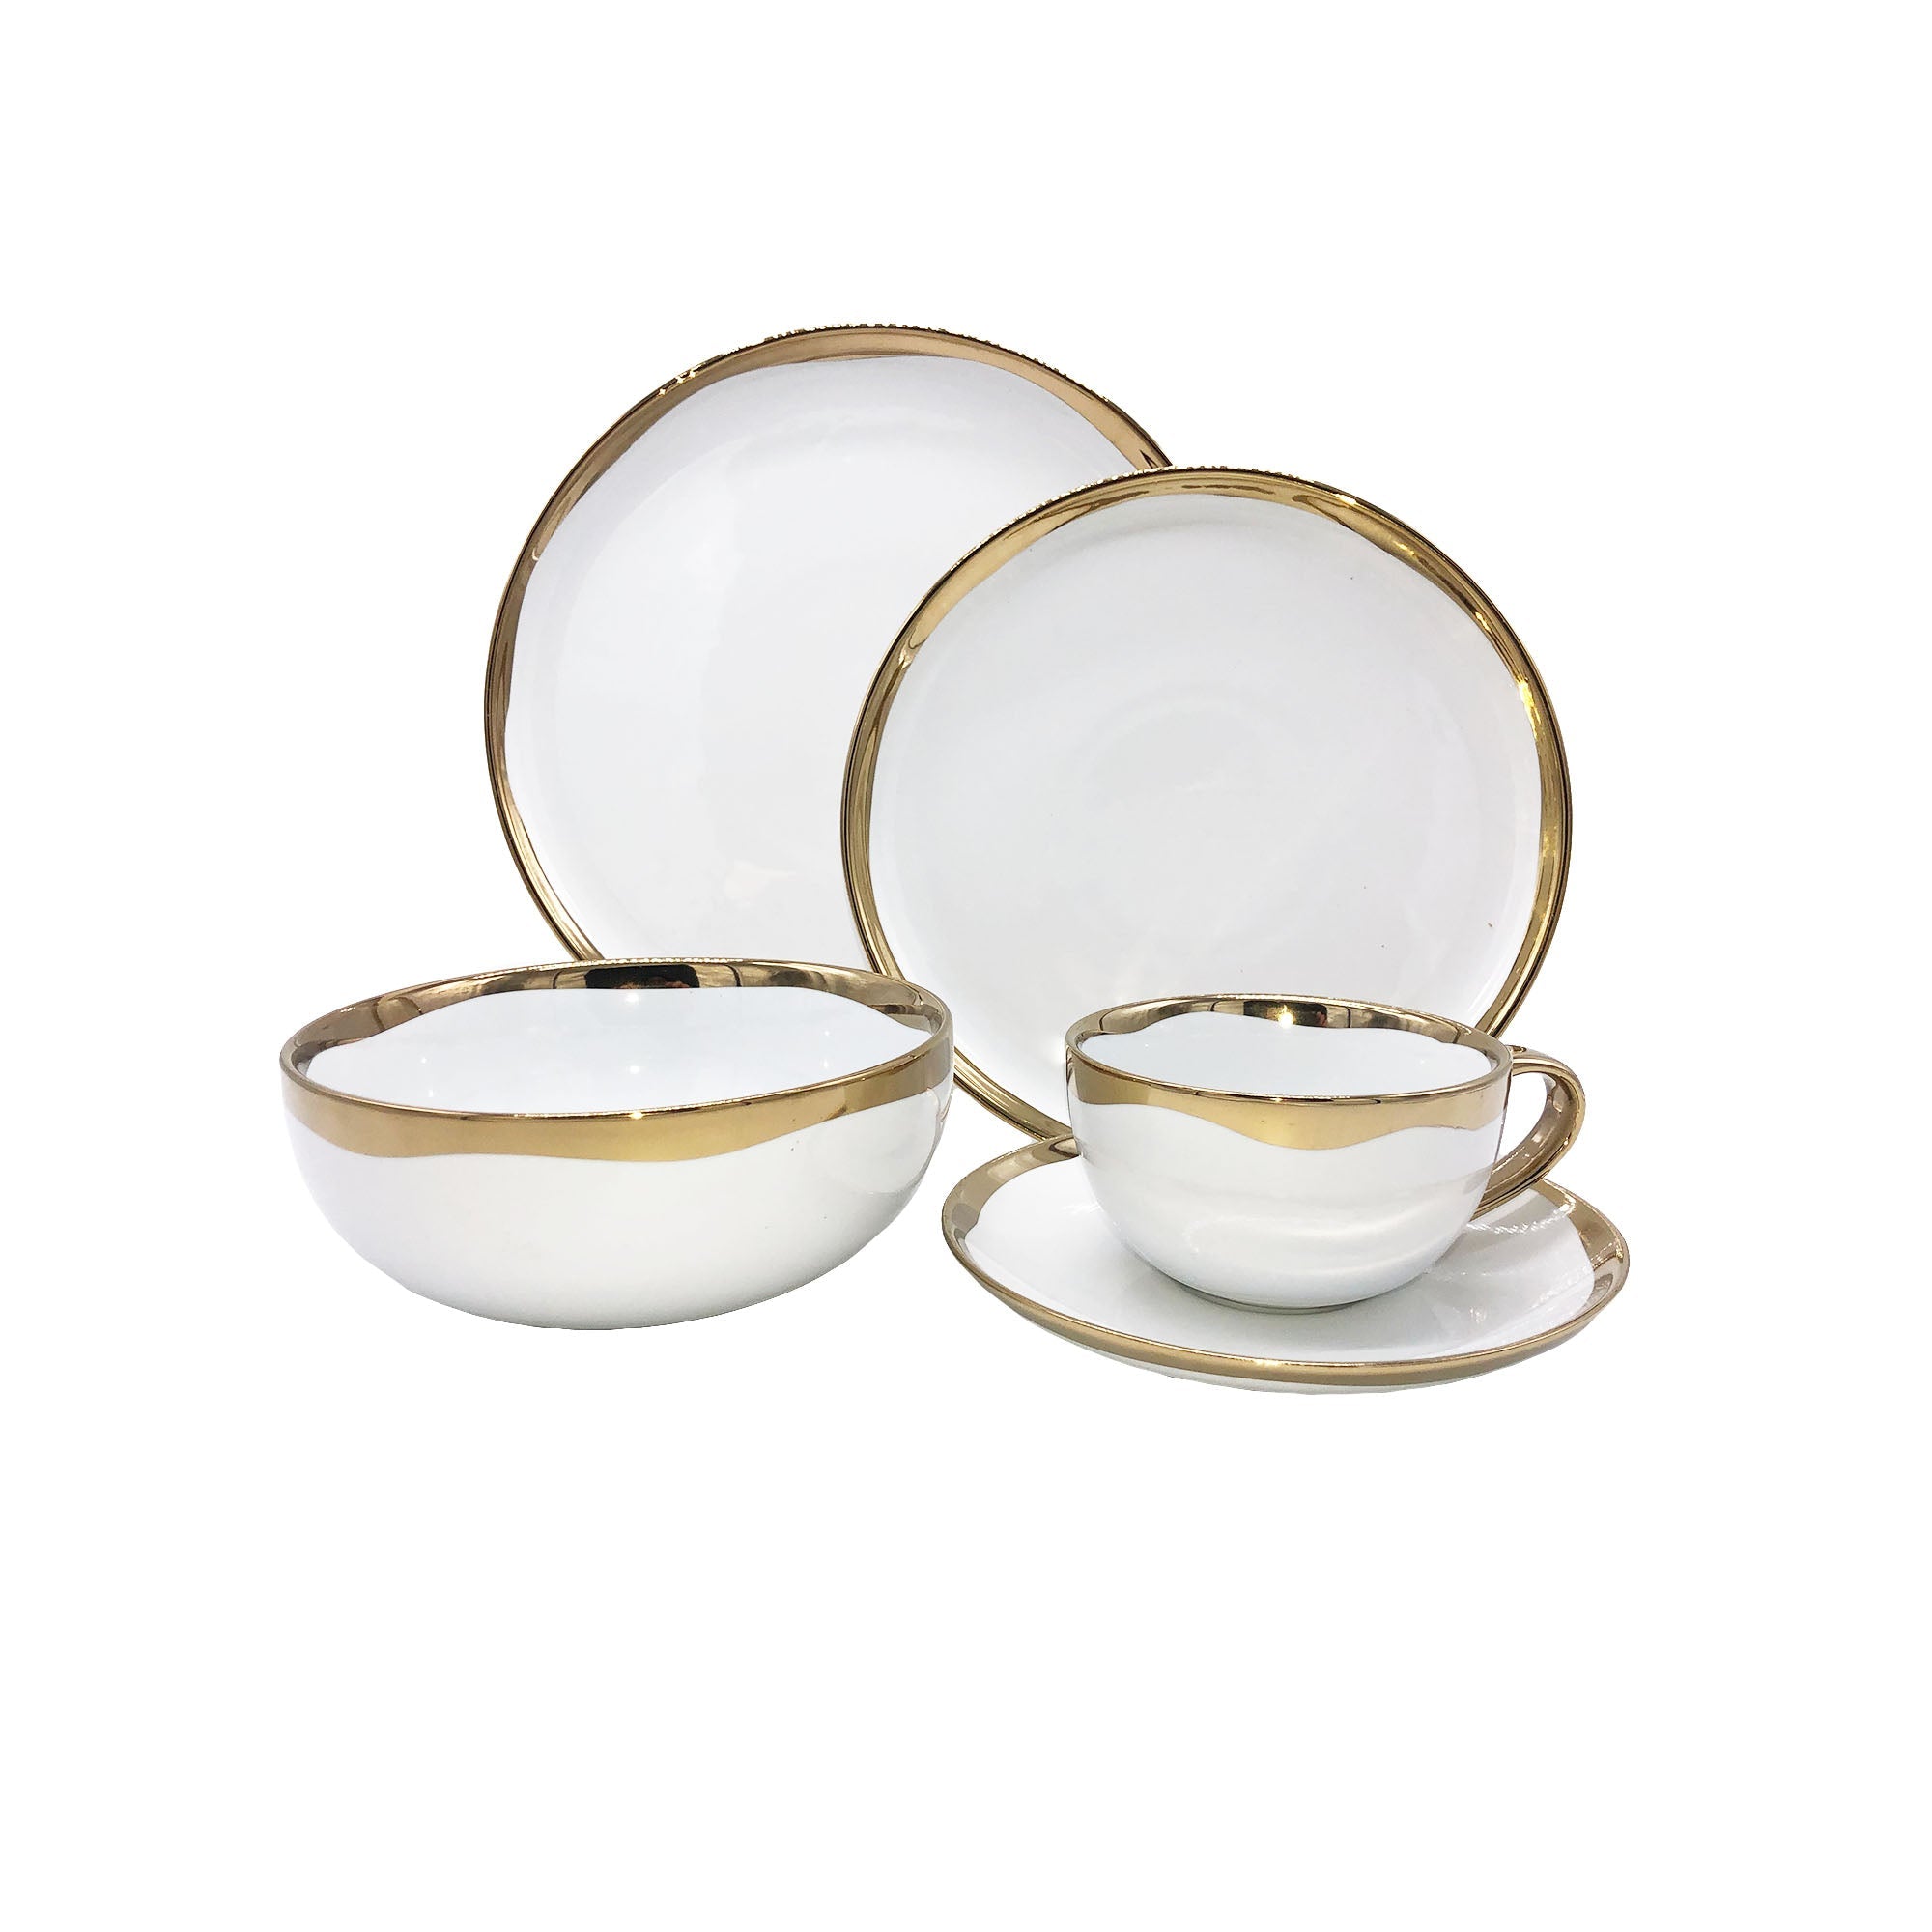 Dauville 5-Piece Service for 1 - Gold